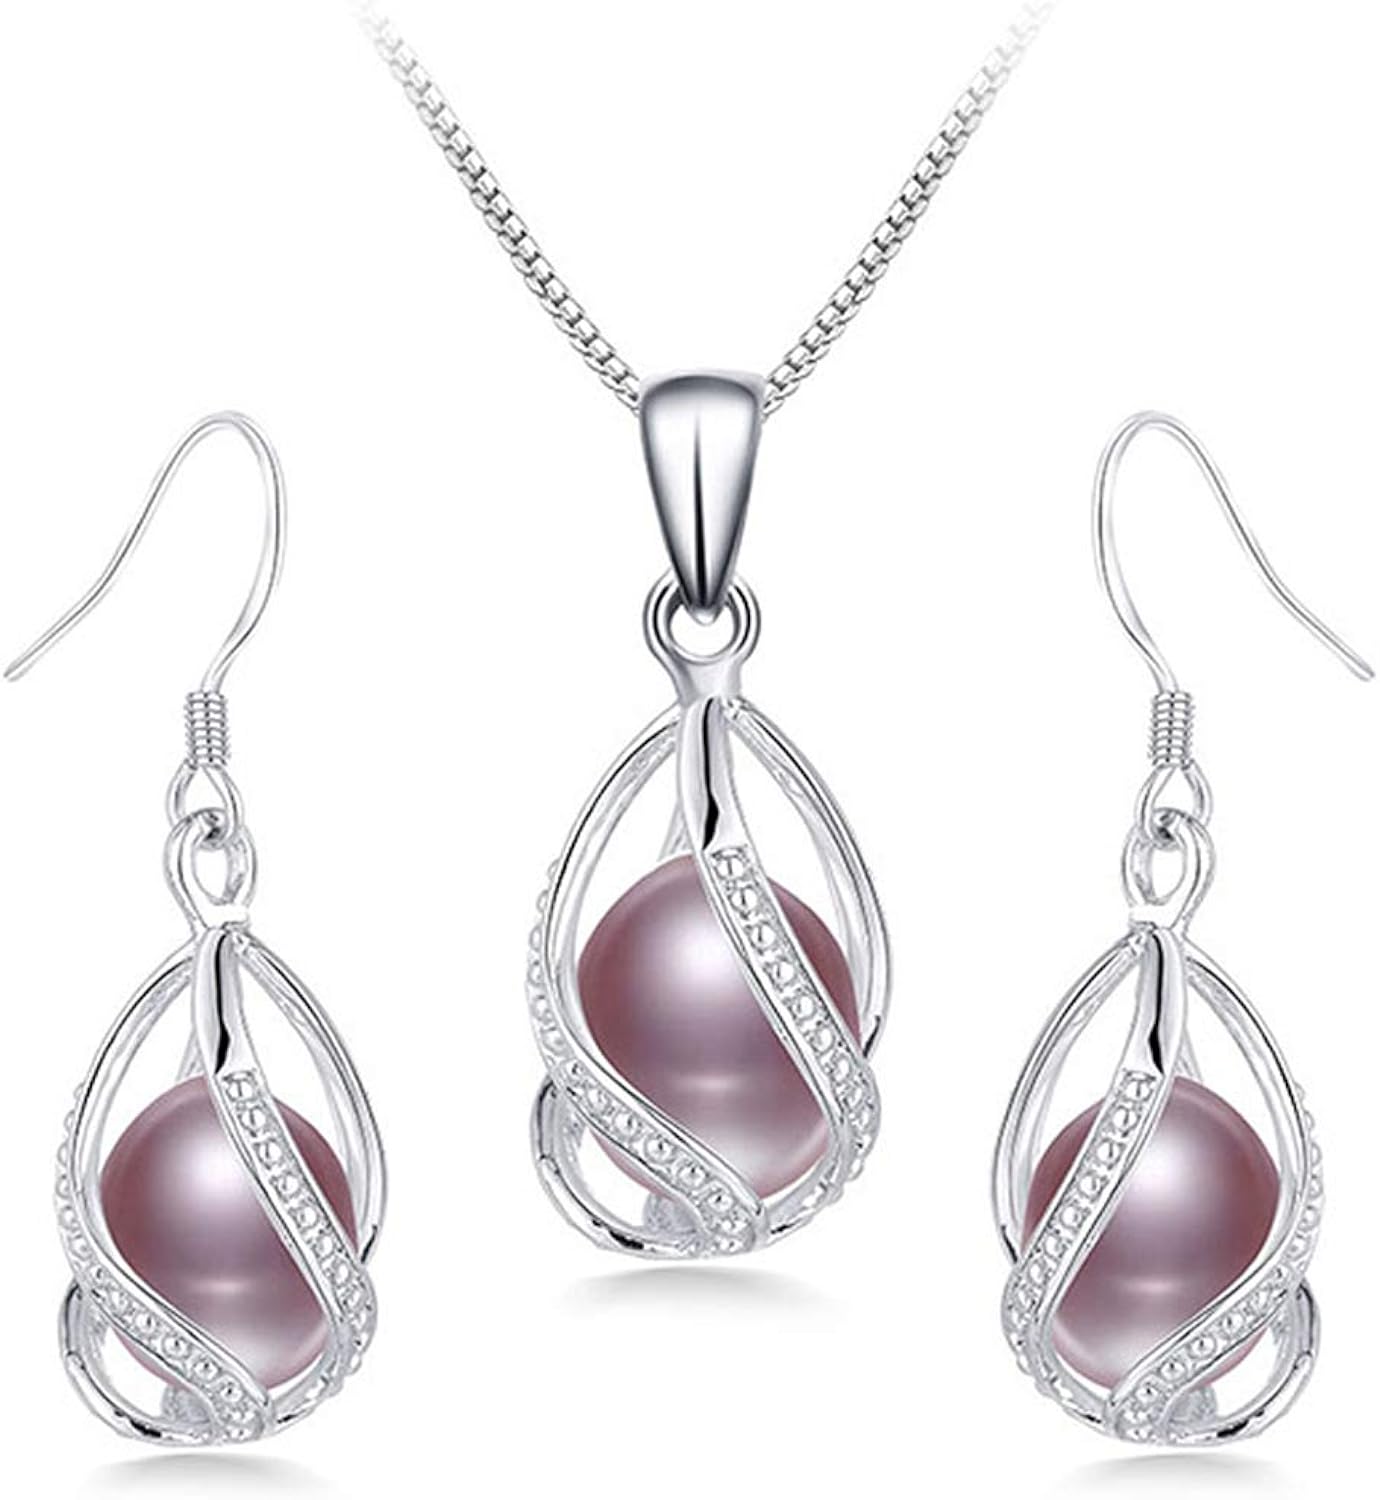 HENGSHENG 100% Natural Freshwater Pearl Jewelry Sets For Women Fashion 925 Sterling Silver EarringsPendant Wedding Jewelry